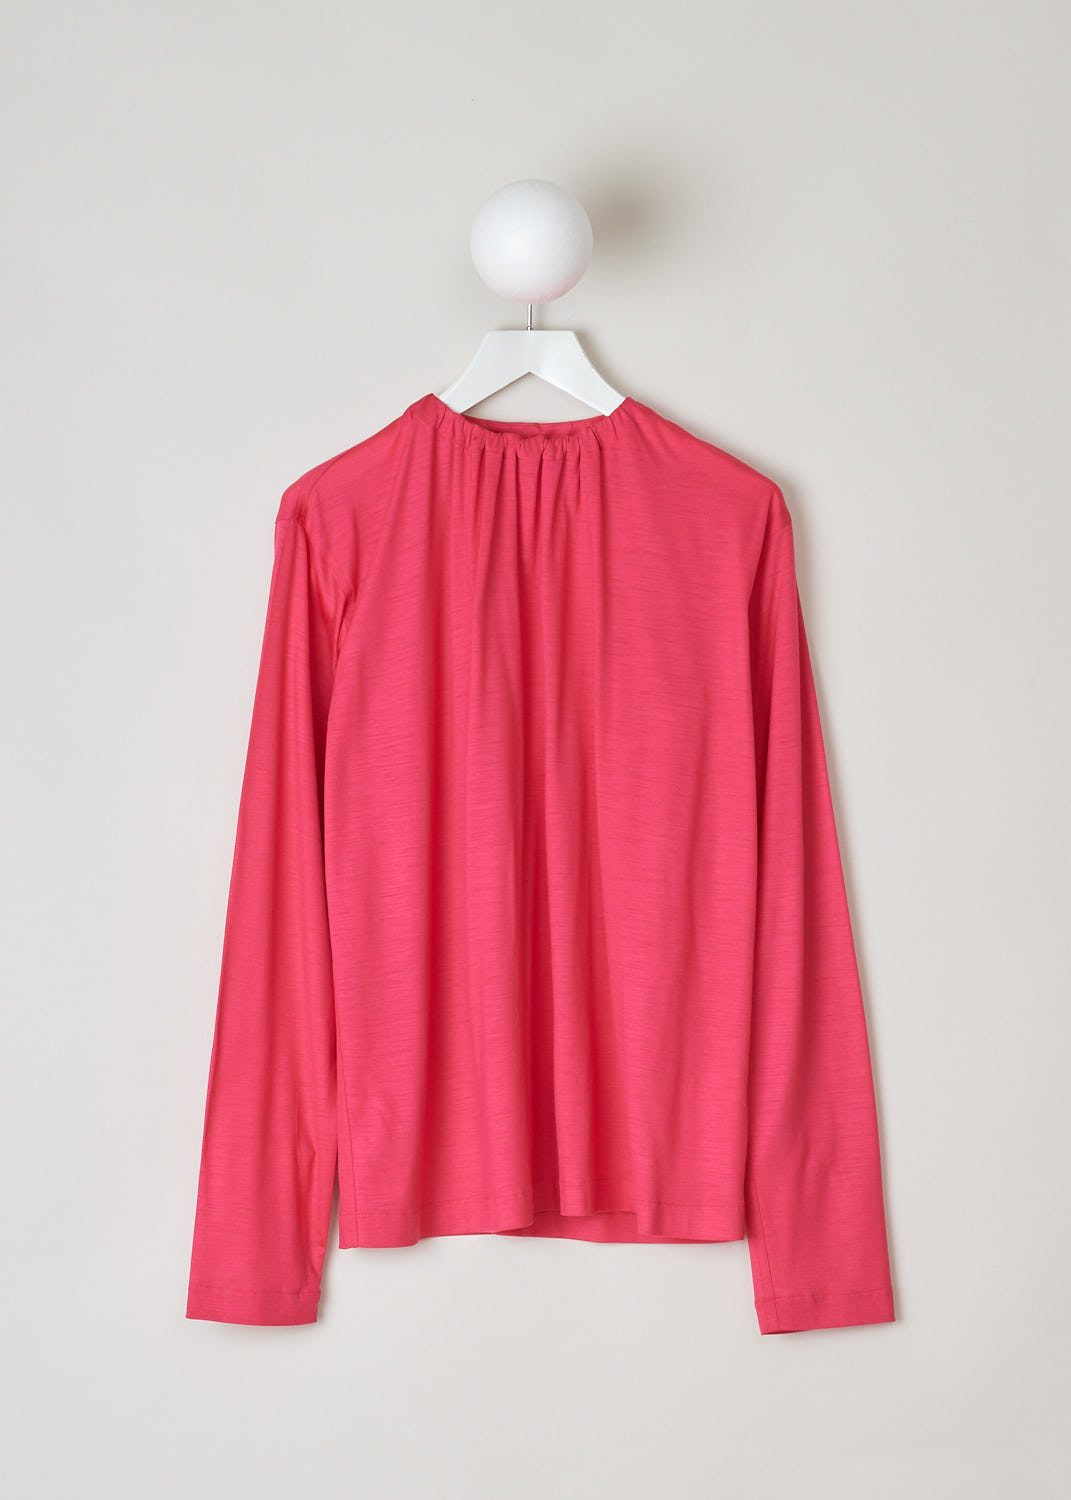 SOFIE Dâ€™HOORE, LONG SLEEVE FUCHSIA TOP, BRIANNA_WOJE_FUCHSIA, Pink, Front, This fuchsia colored top features a gathered elasticated neckline. The long sleeve top drapes the bodice, creating a relaxed fit. 
